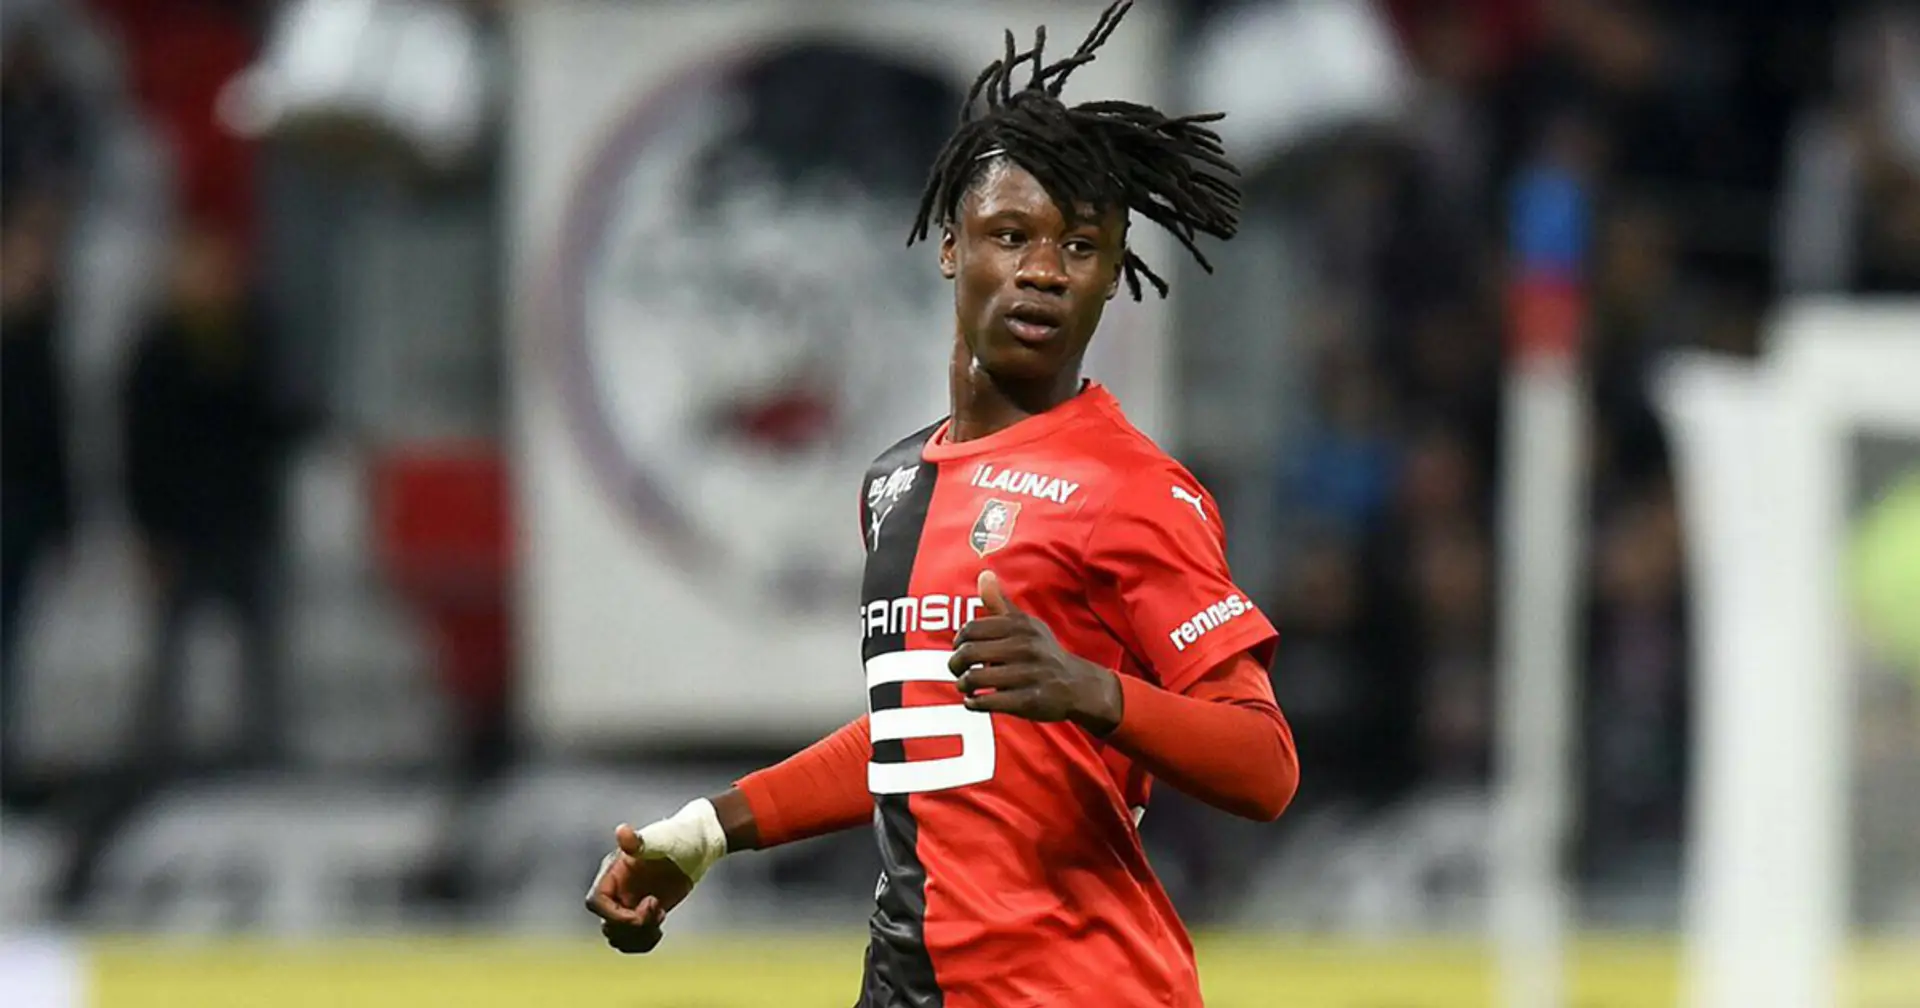 Barcelona reportedly rule out Camavinga move due to his price tag – should we get deal done?